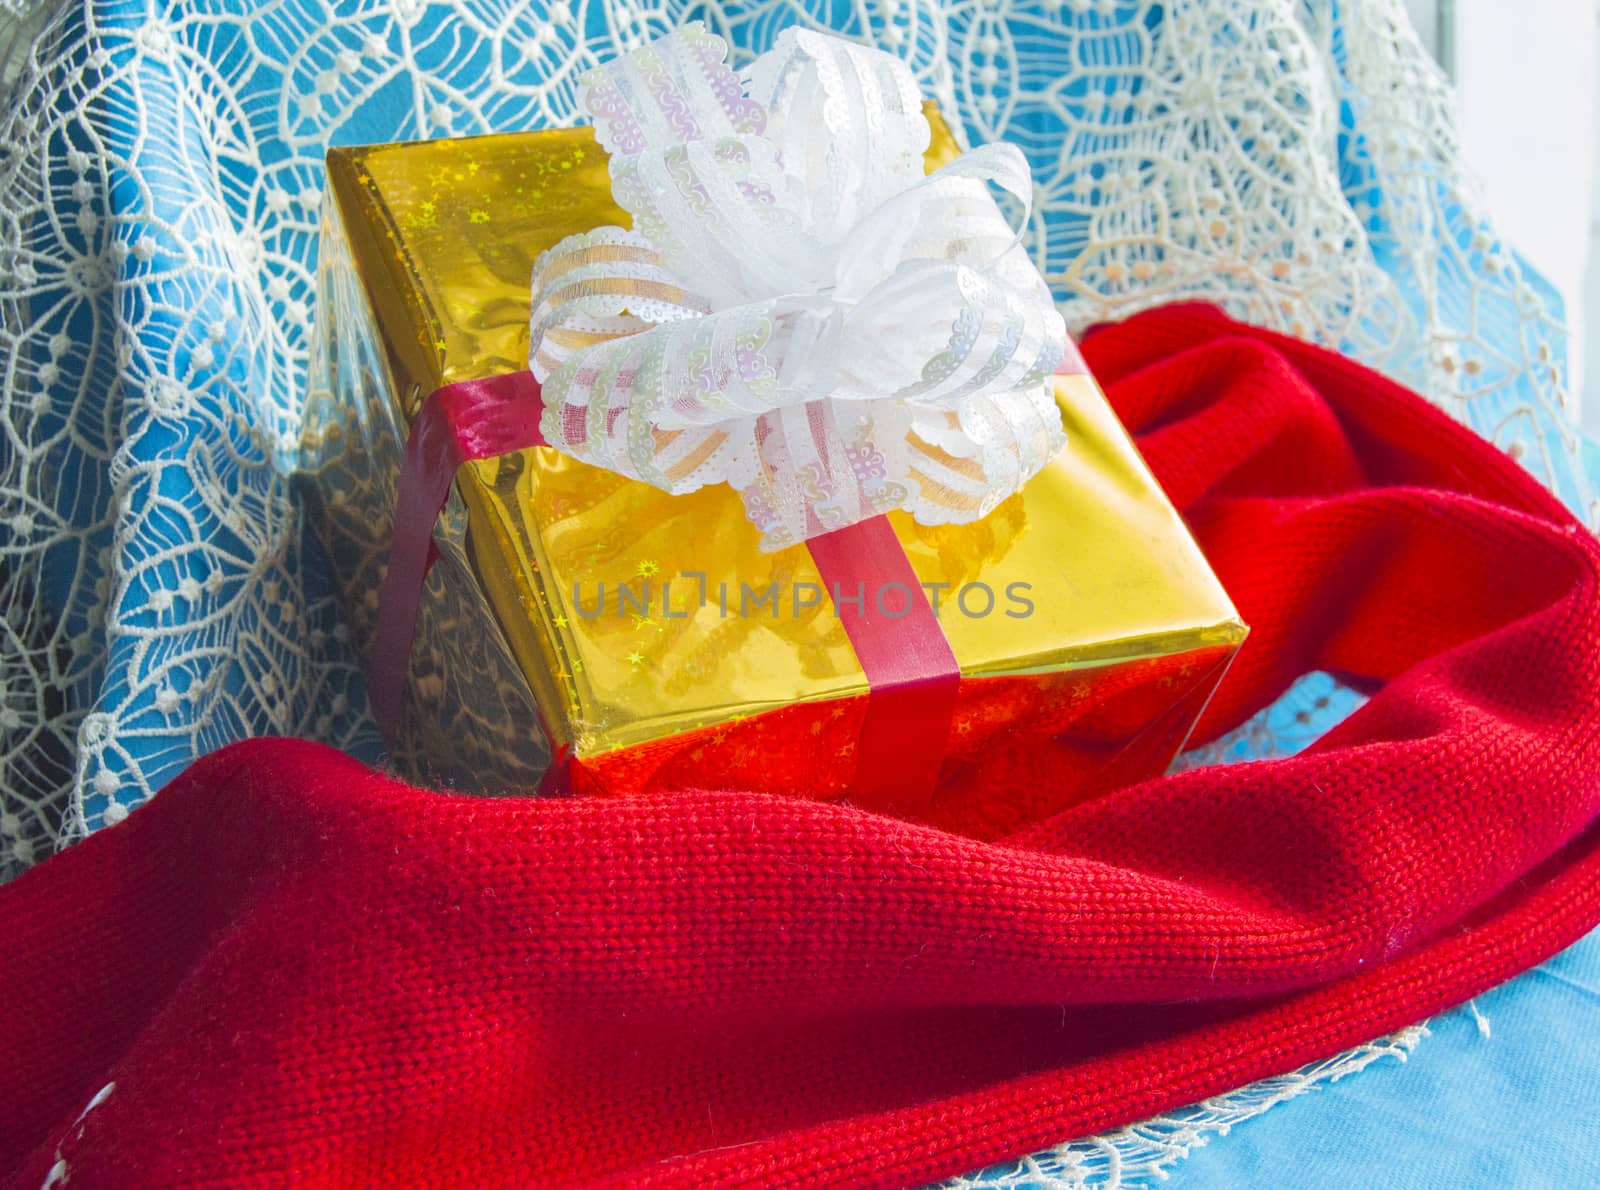 Gift box and red knit scarf, Christmas.